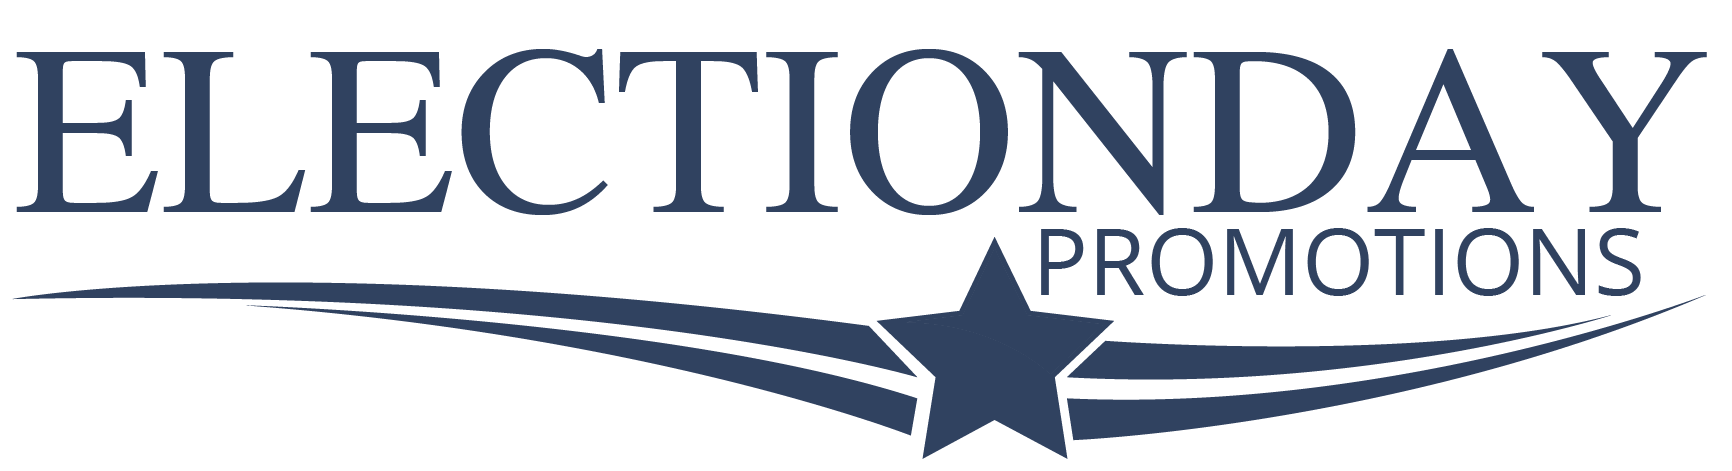 Election Day Promotions Company Logo